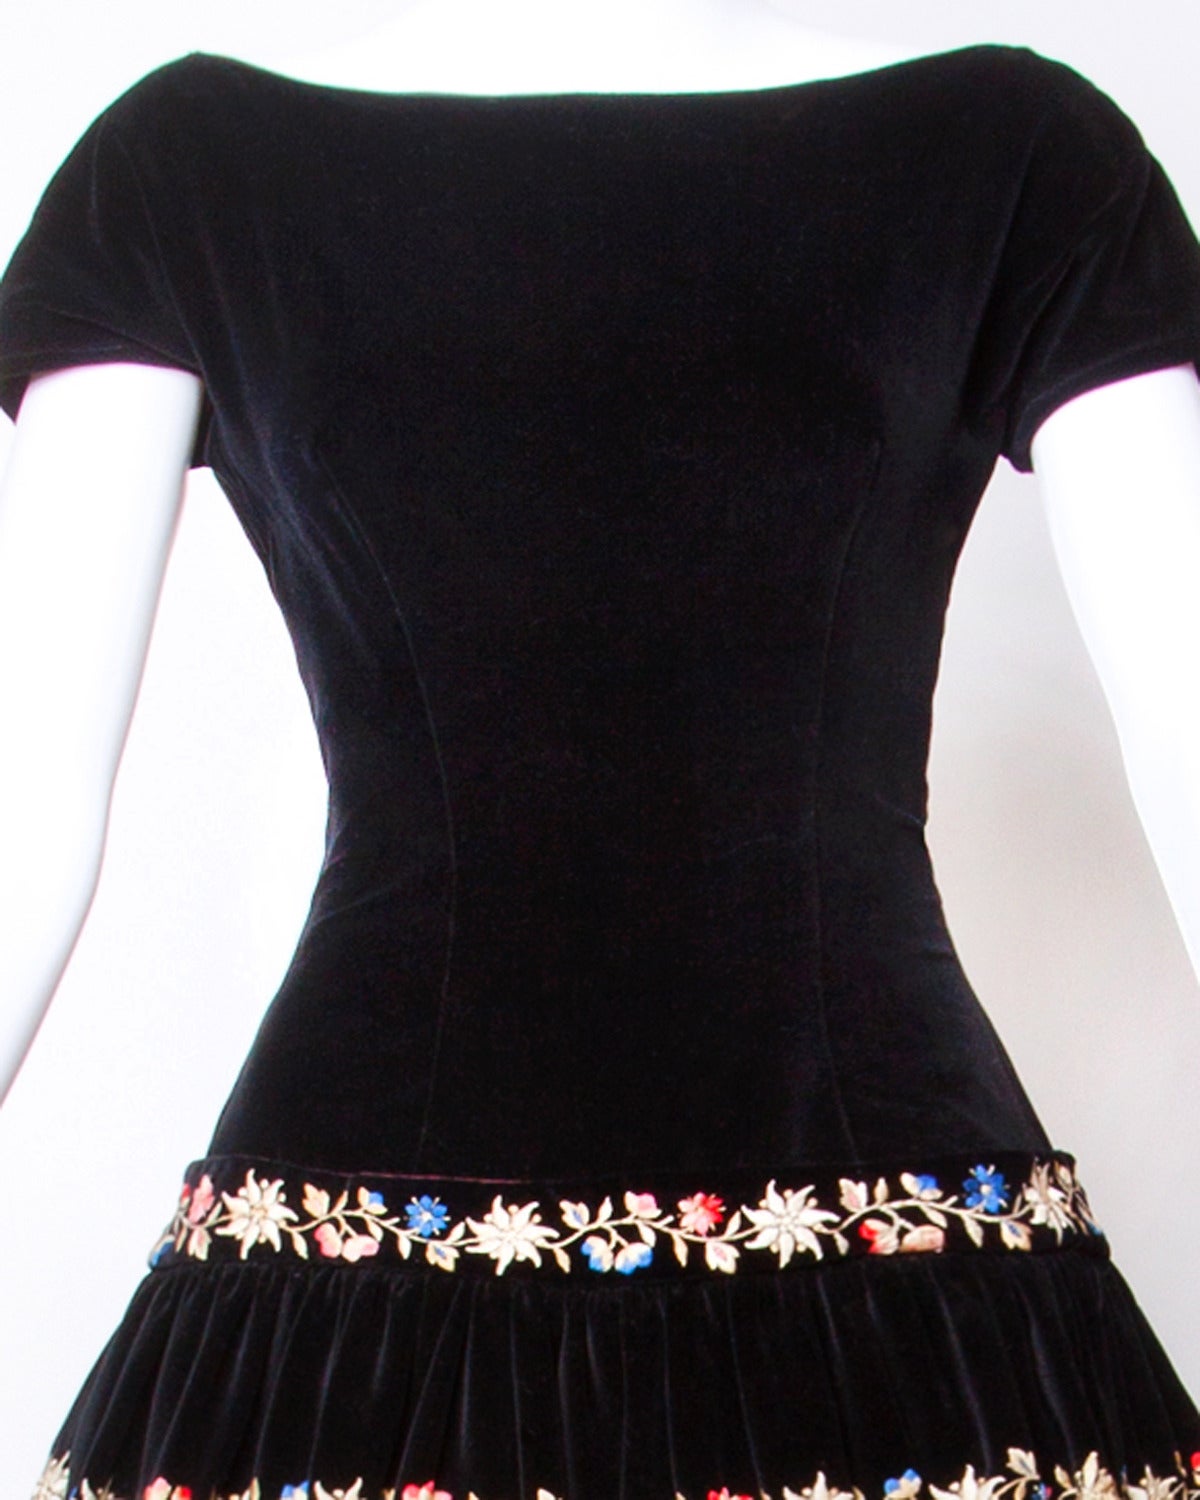 Early 1950s black velvet cocktail dress with colorful floral embroidery. Full sweep.

Details:

Fully Lined
Back Metal Zip Snap and Hook Closure
Estimated Size: Small
Color: Black/ Multicolored
Fabric: Velvet

Measurements:

Bust: Up To